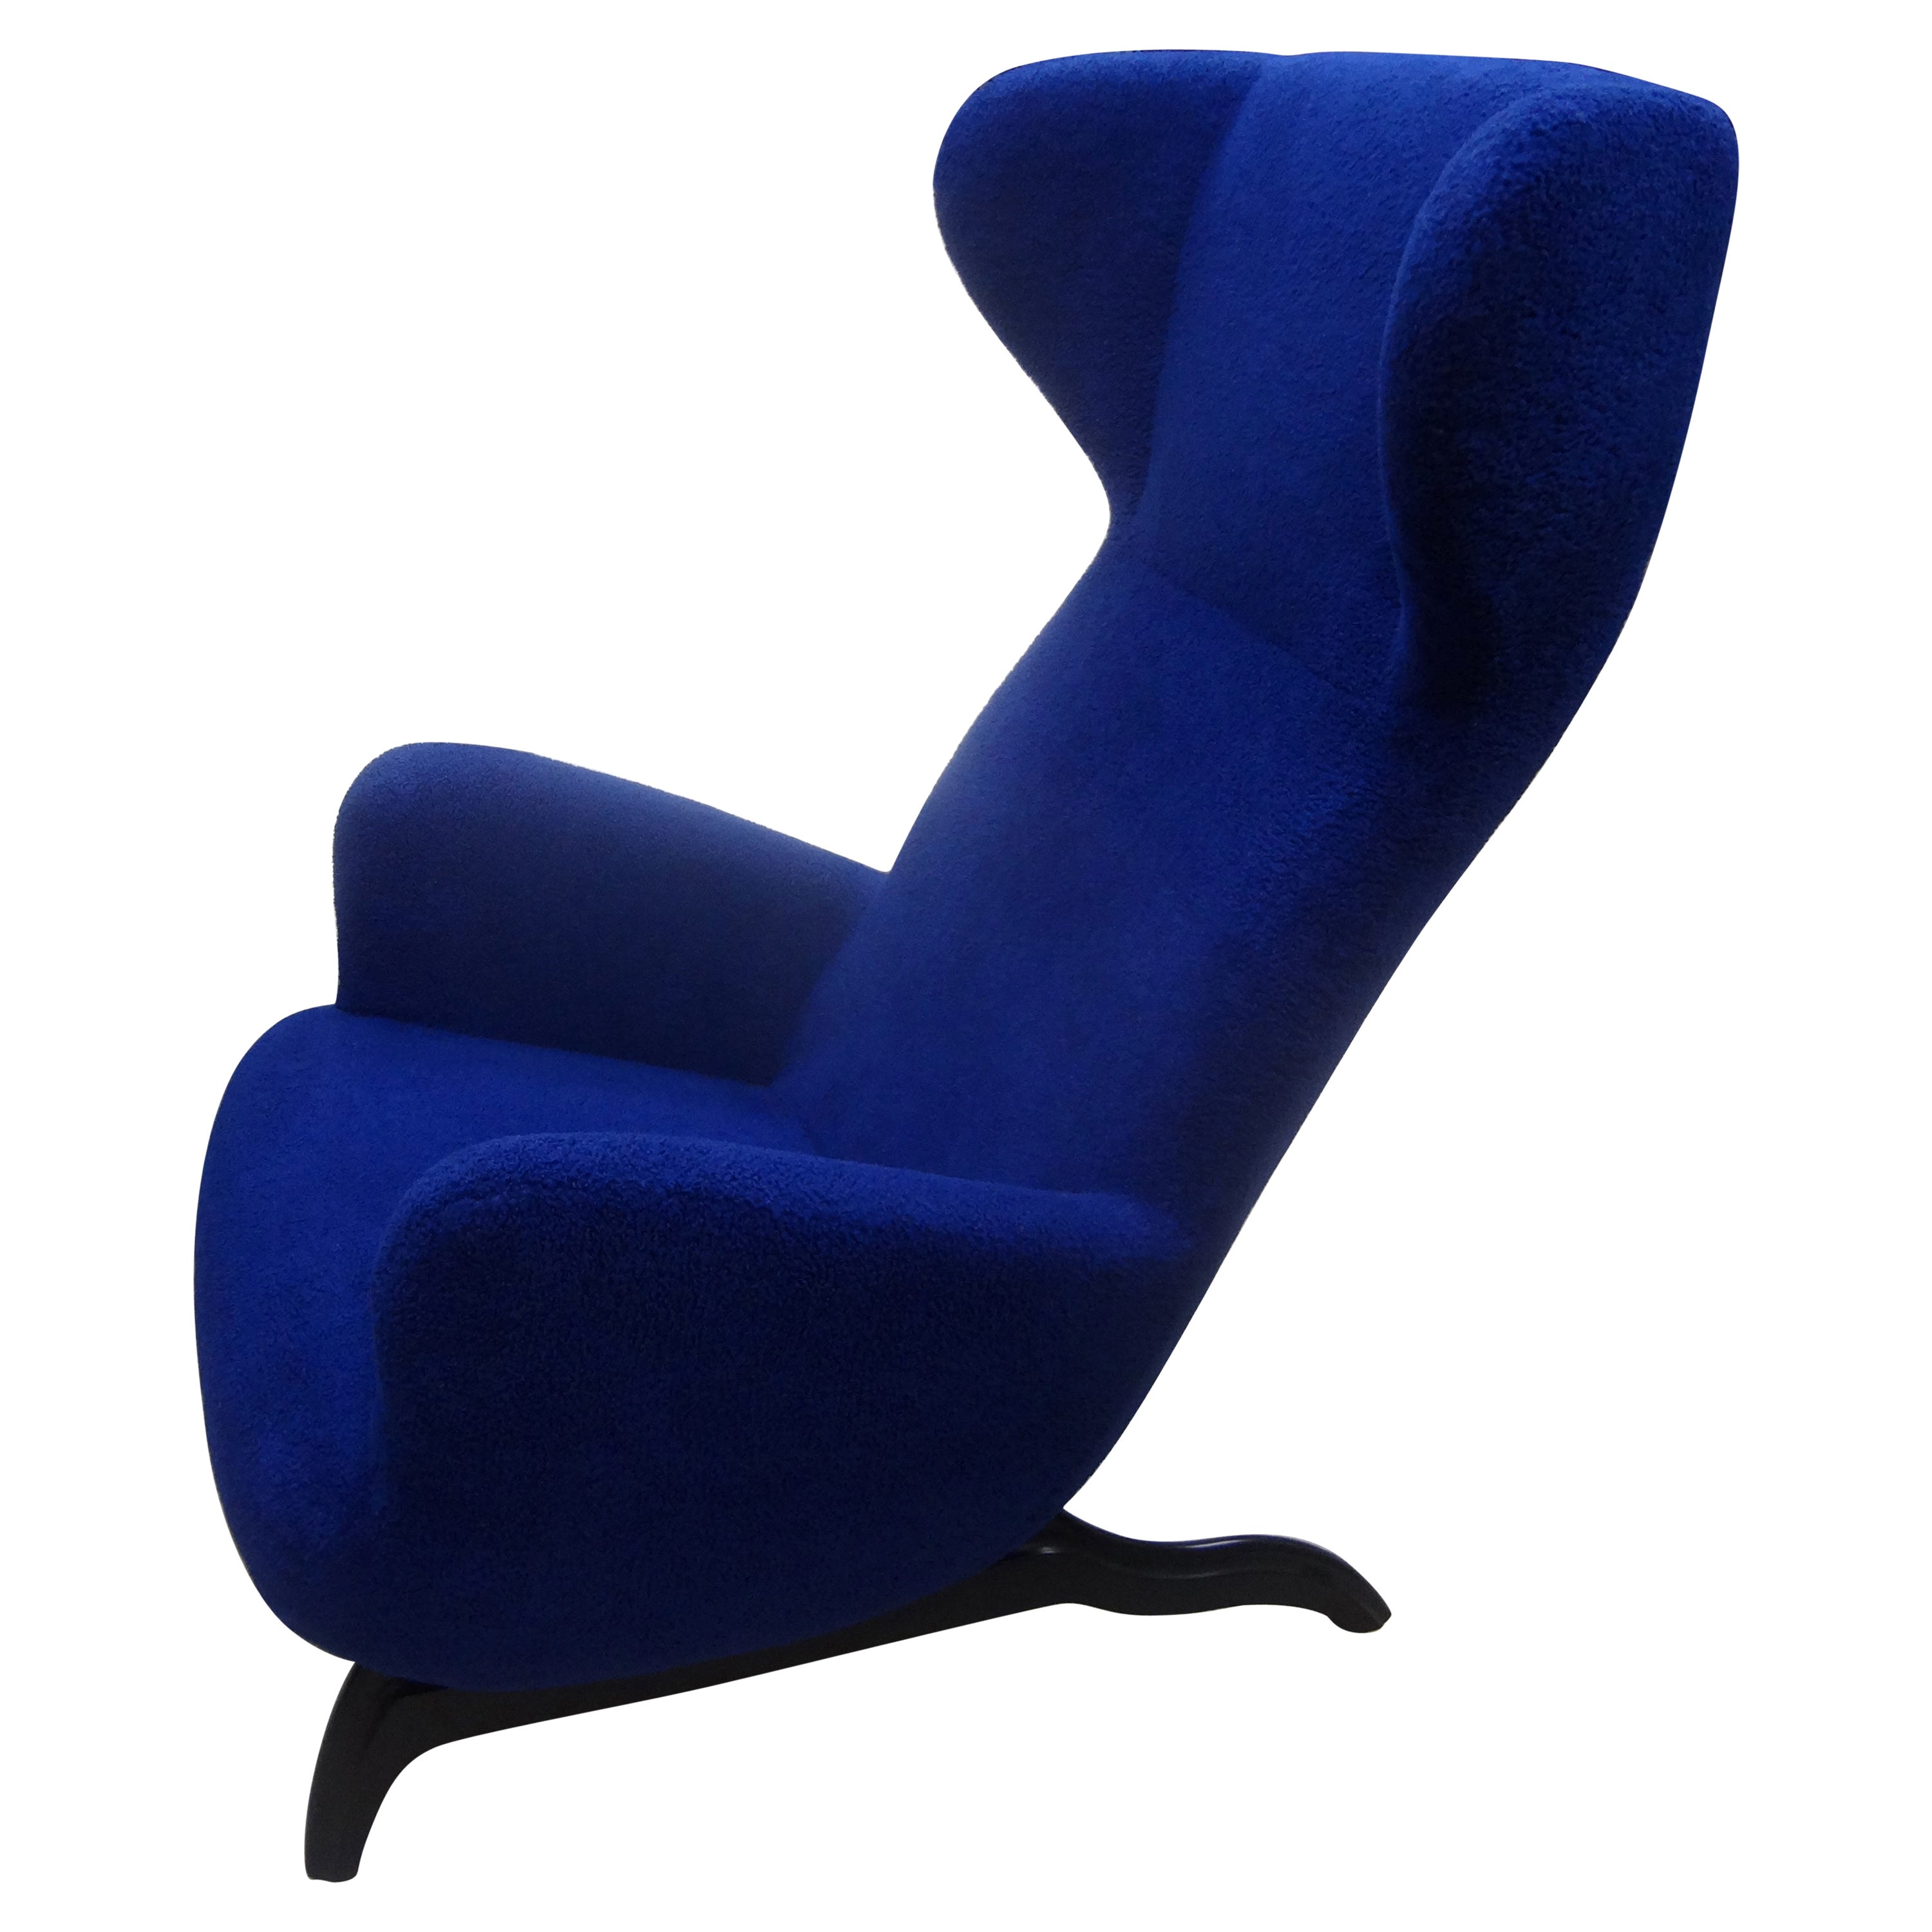 Italian Ardea Lounge Chair After A Design By Carlo Mollino 